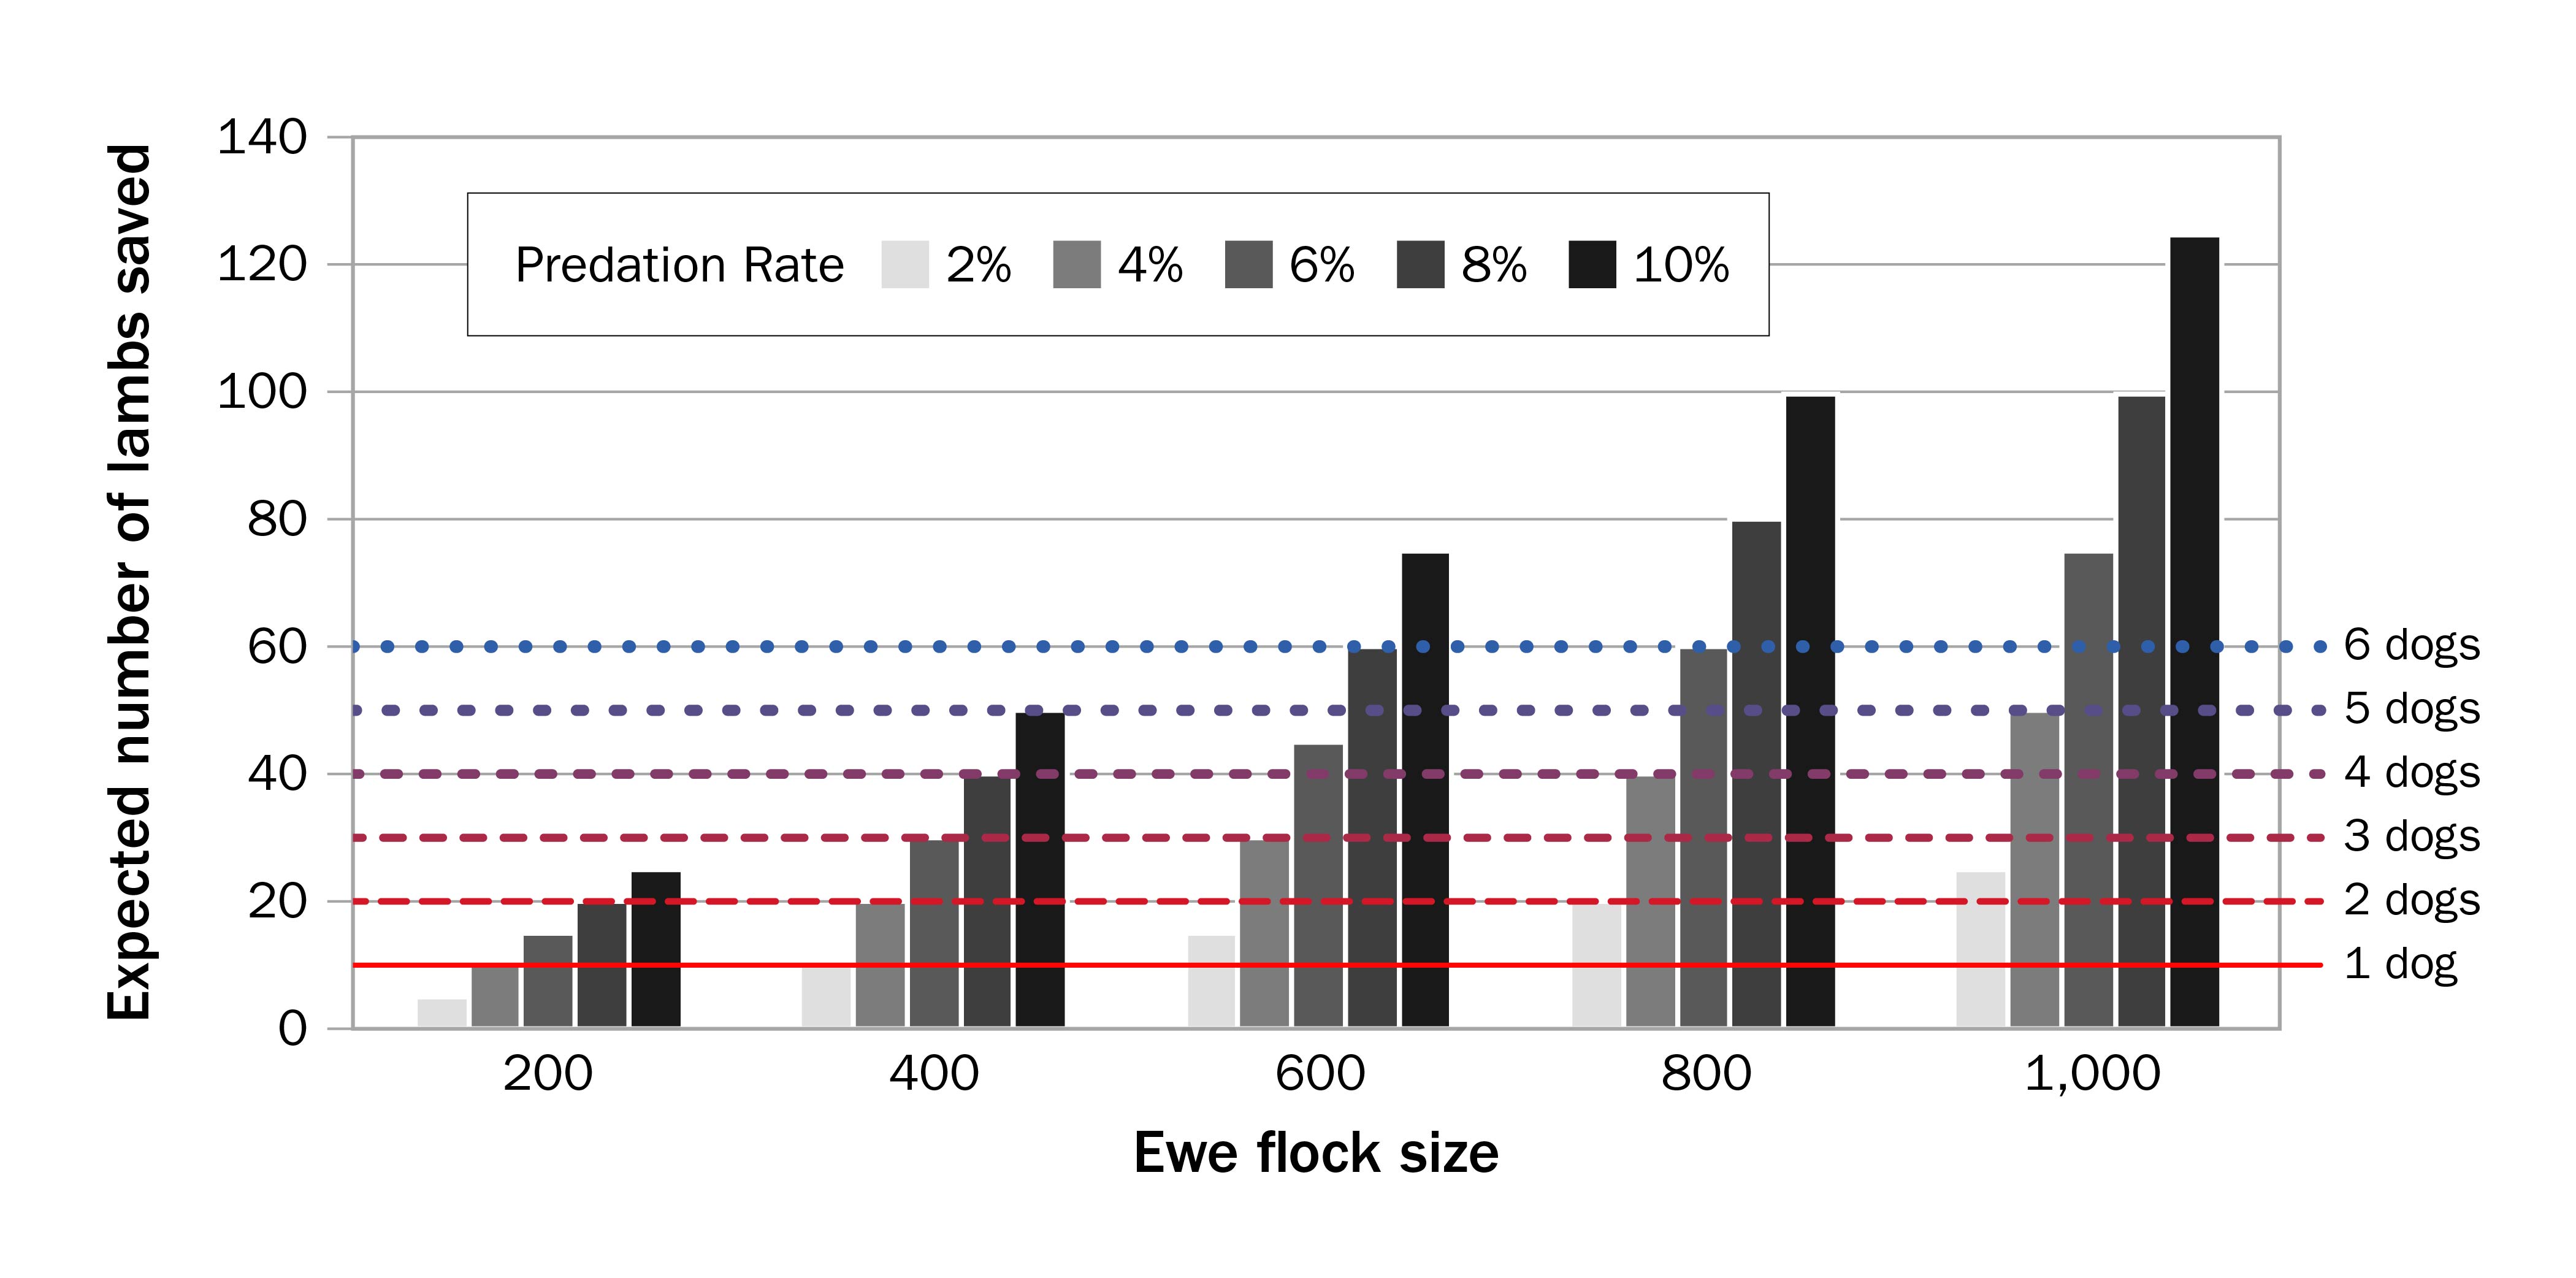 Bar graph showing expected lambs saved at various predation rates of 2%, 4%, 6%, 8% and 10% for flocks ranging from 200–1,000 ewes and the minimum number of lambs saved for a given number of dogs to be cost-effective. Lines show number of dogs as 1, 2, 3, 4, 5 or 6 dogs.